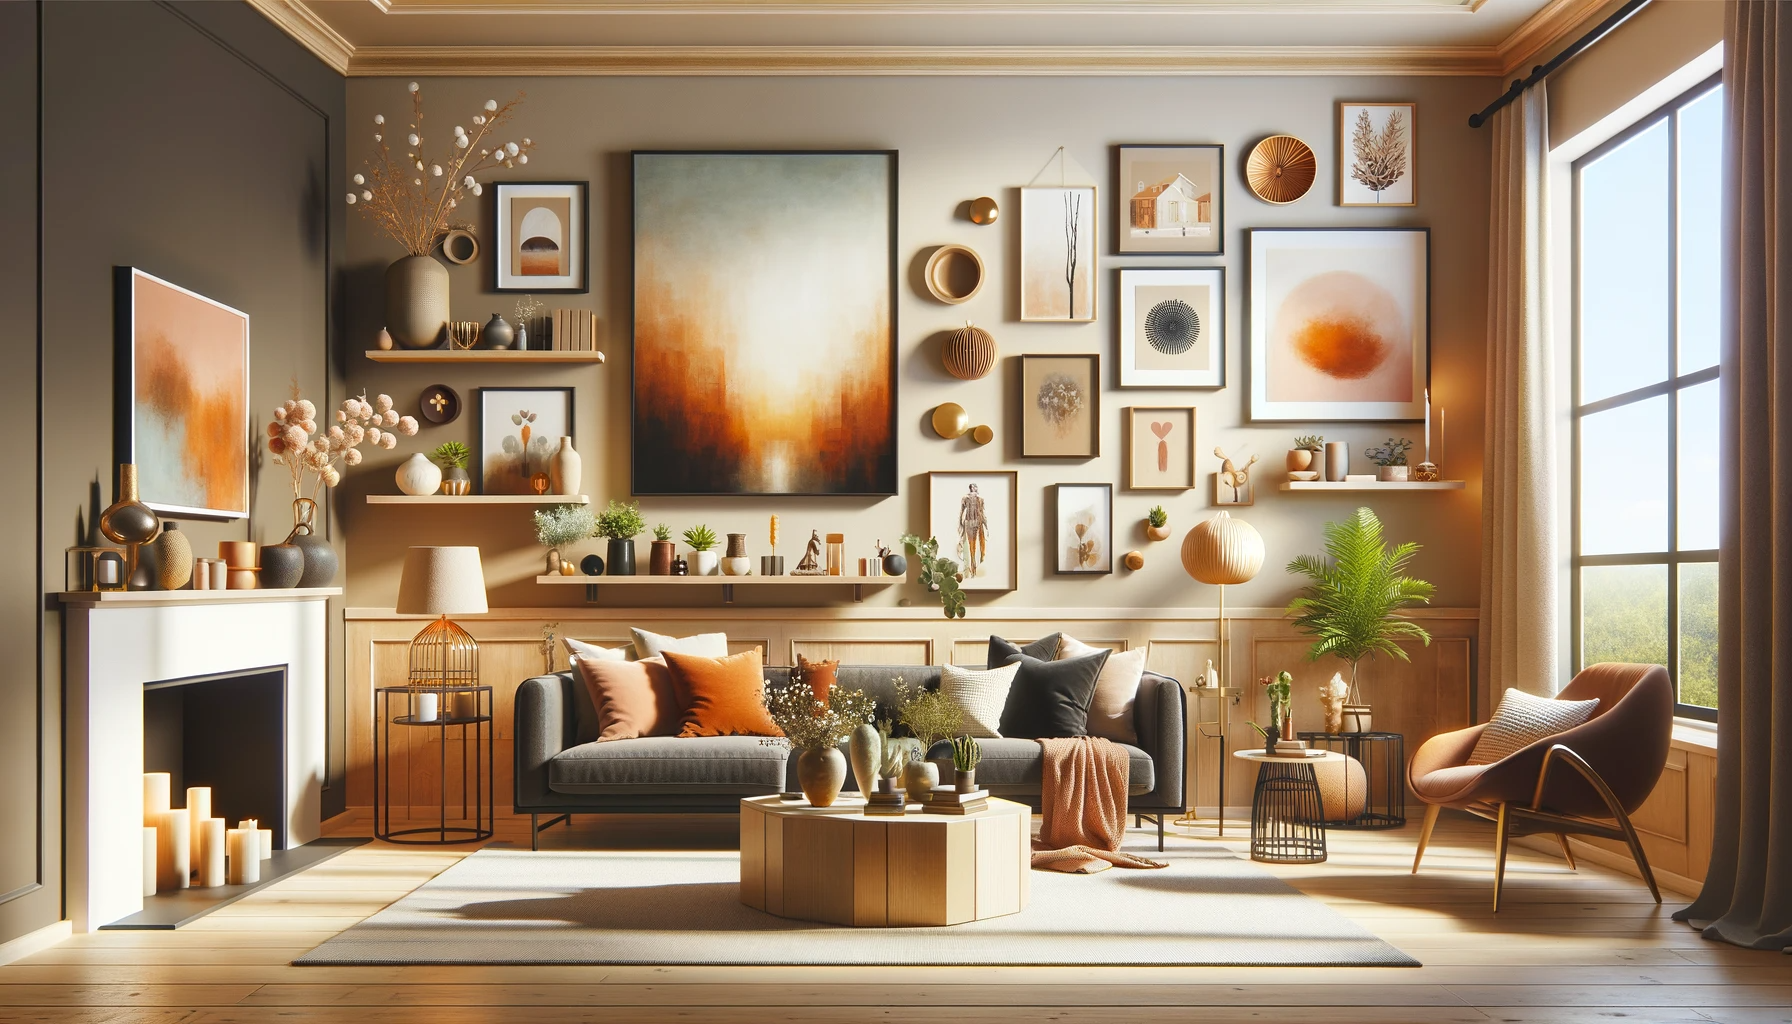 6 Essential Art-Decorating Tips to Transform Your House into a Home